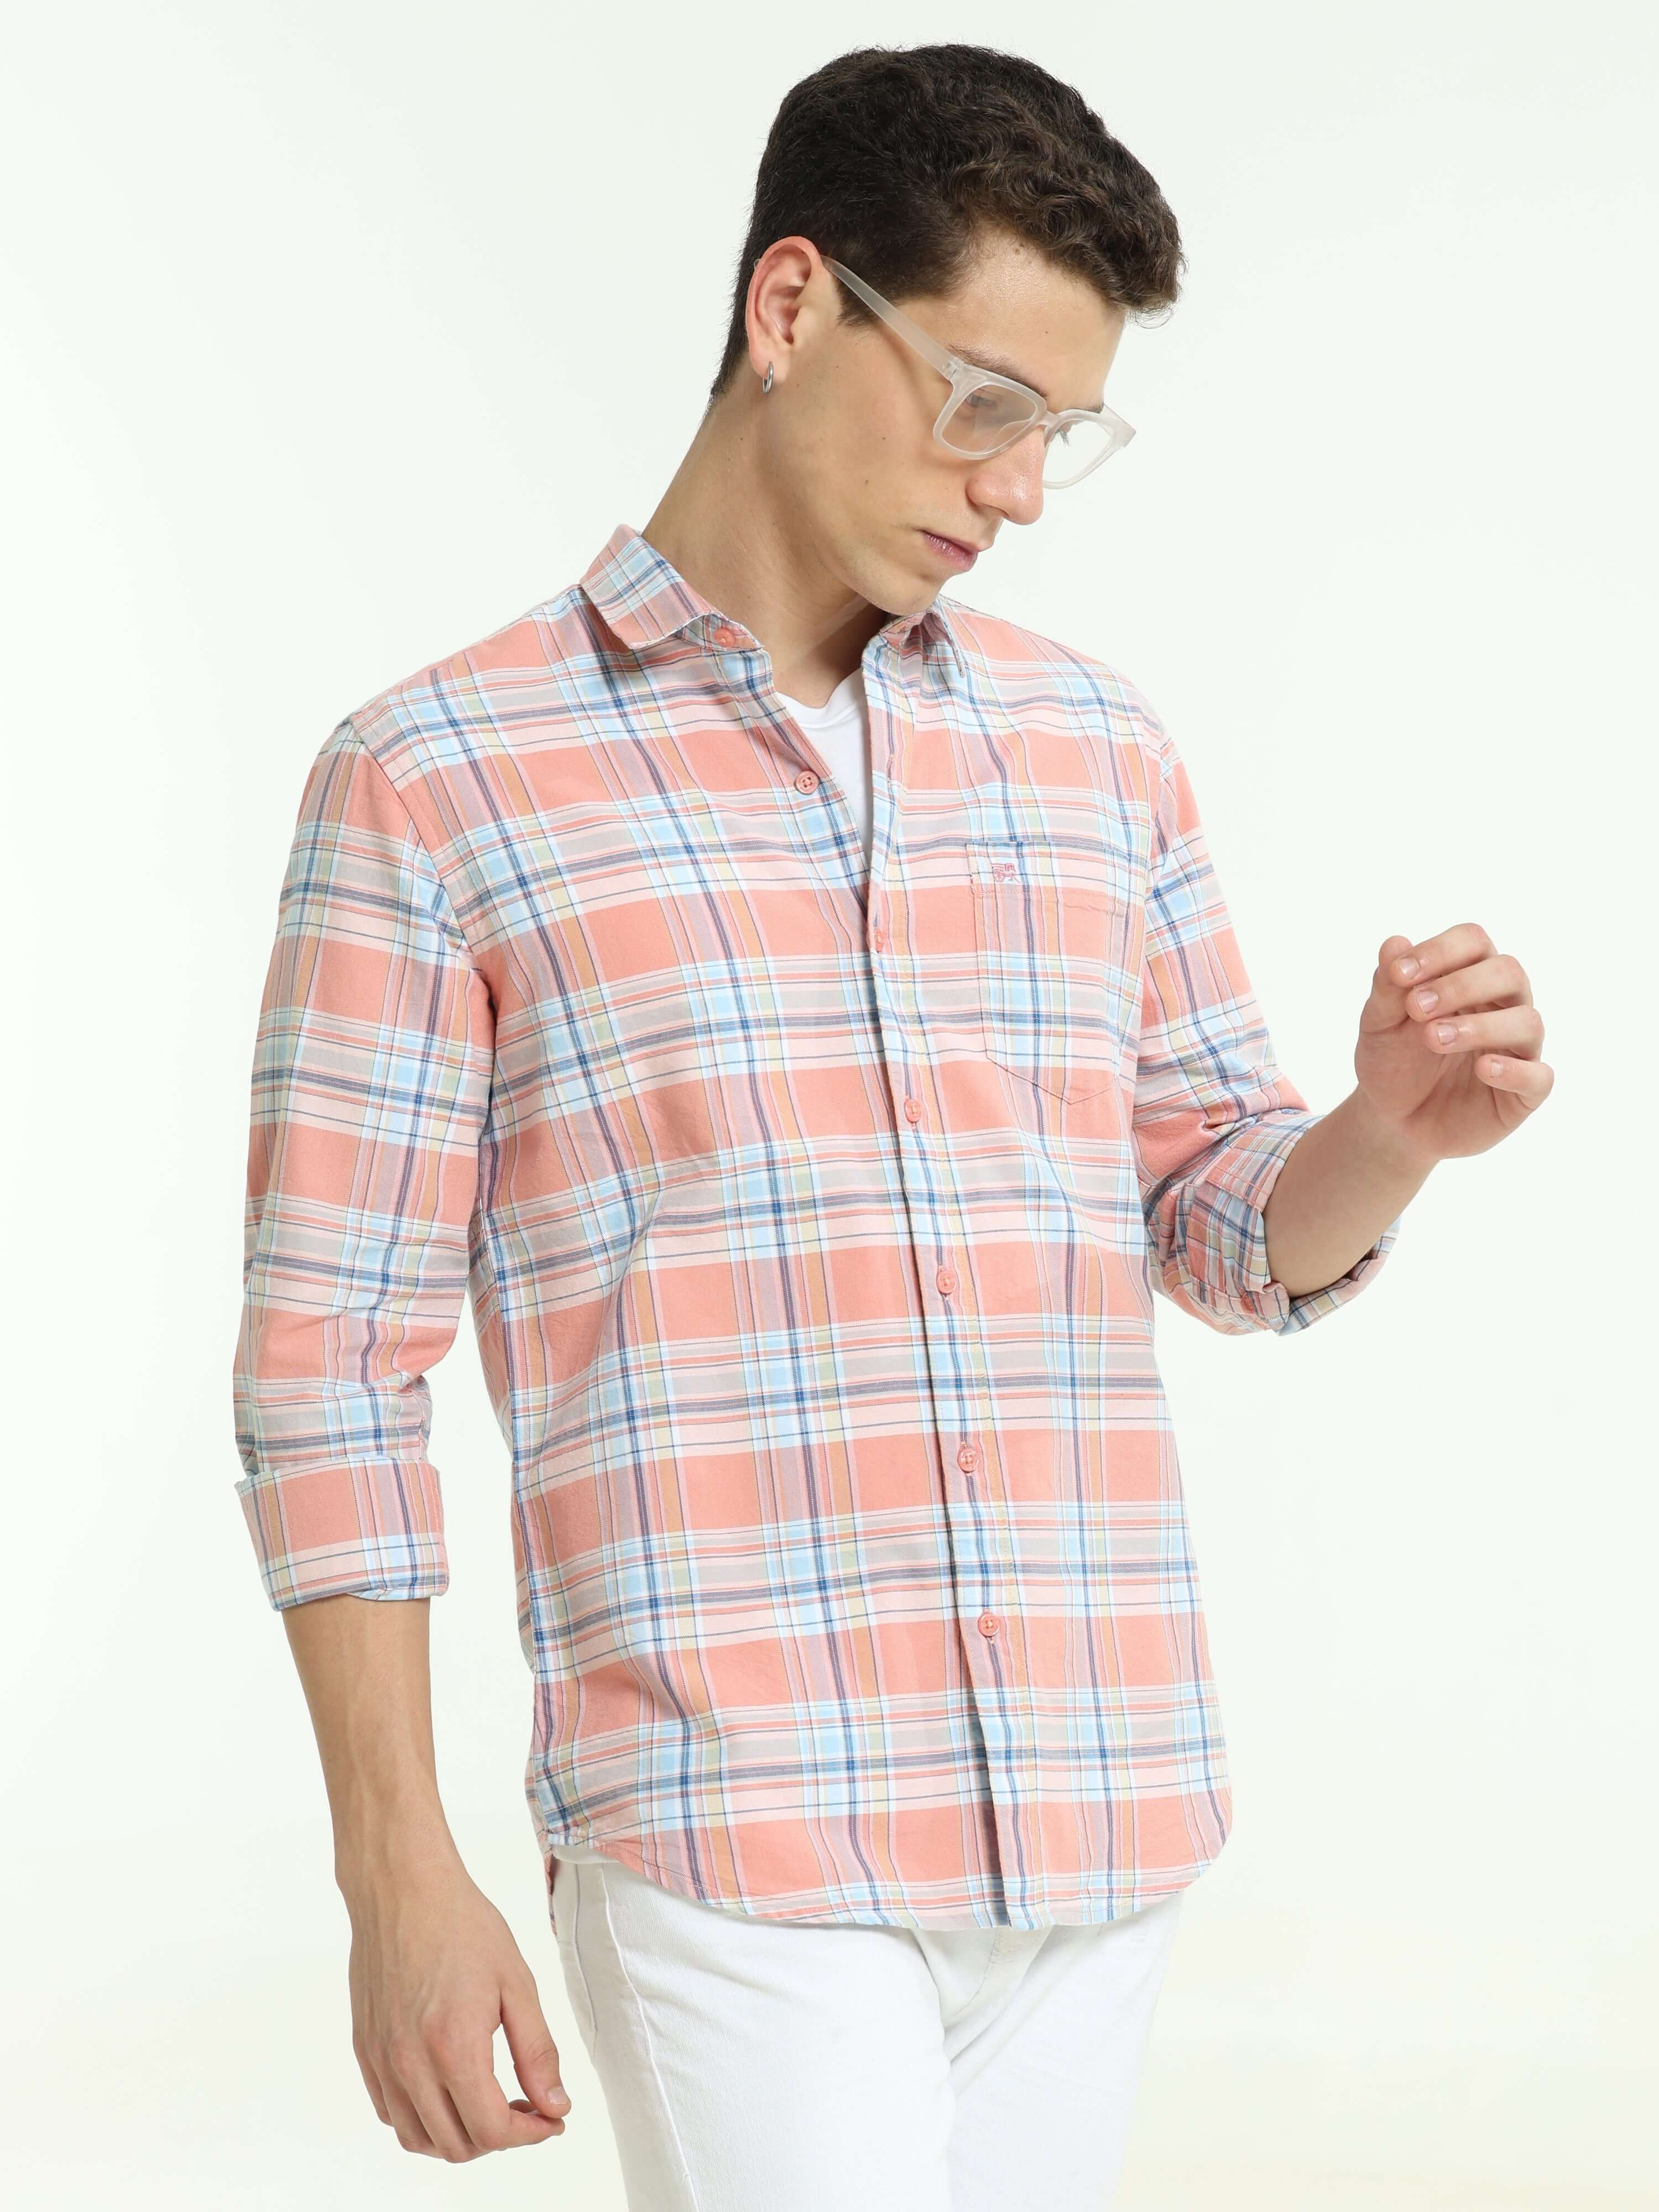 Pink off-blue casual check shirt shop online at Estilocus. • Full-sleeve check shirt• Cut and sew placket• Regular collar• Double button square cuff.• Single pocket with logo embroidery• Curved hemline• All double-needle construction, finest quality sewin